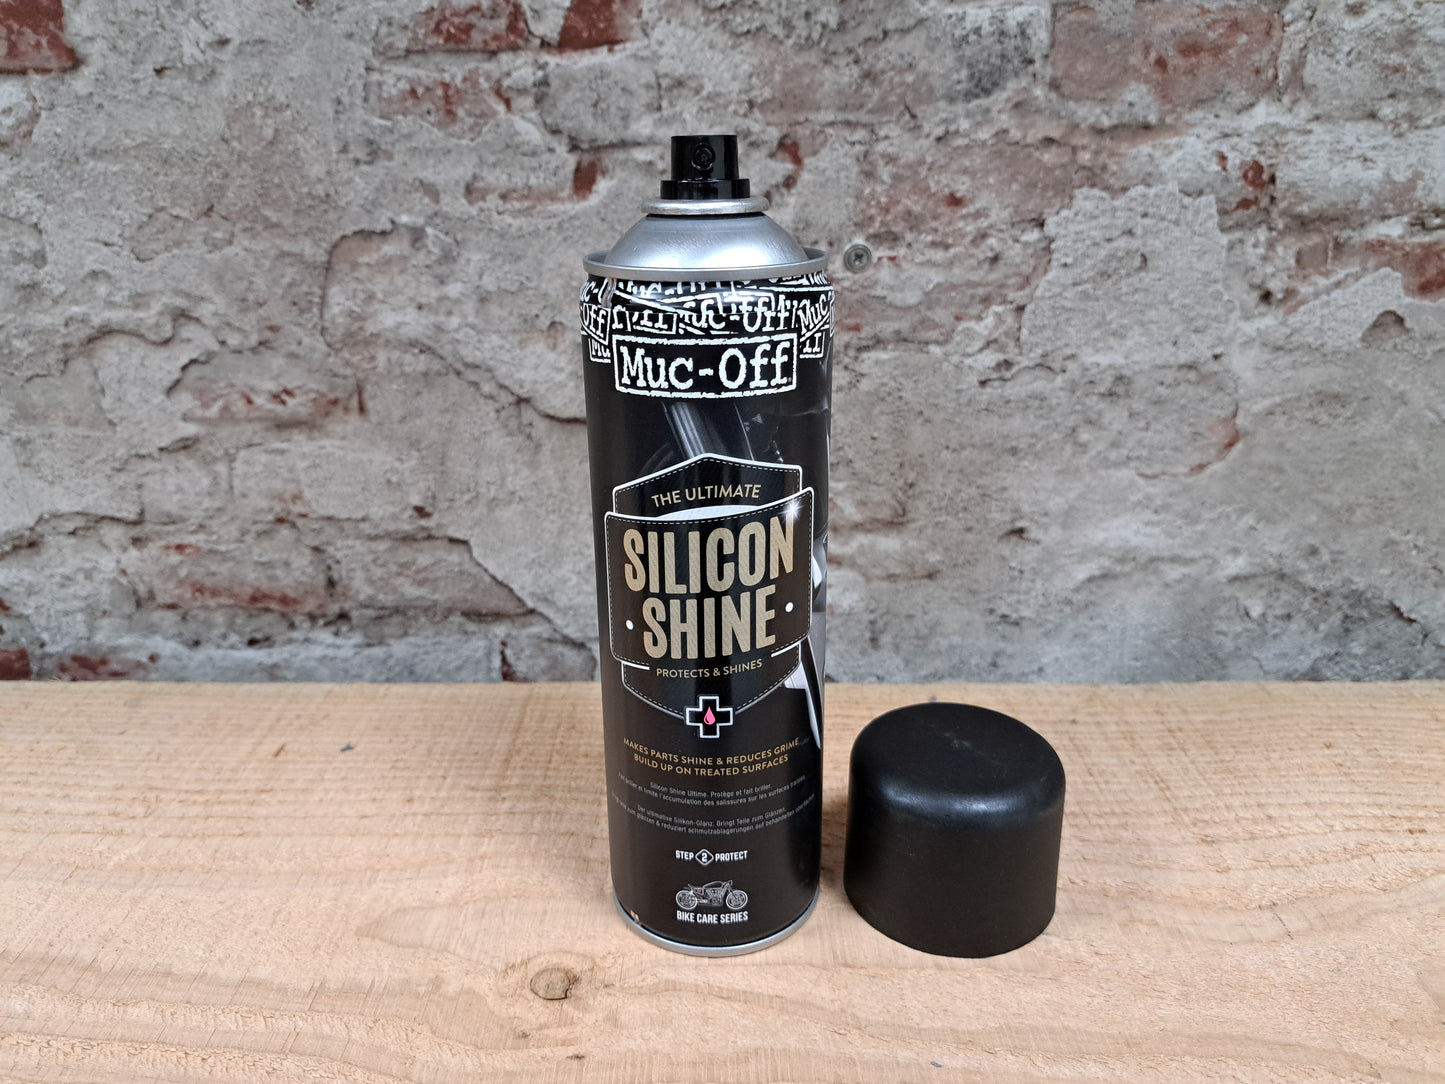 Muc-Off Motorcycle Silicon Shine